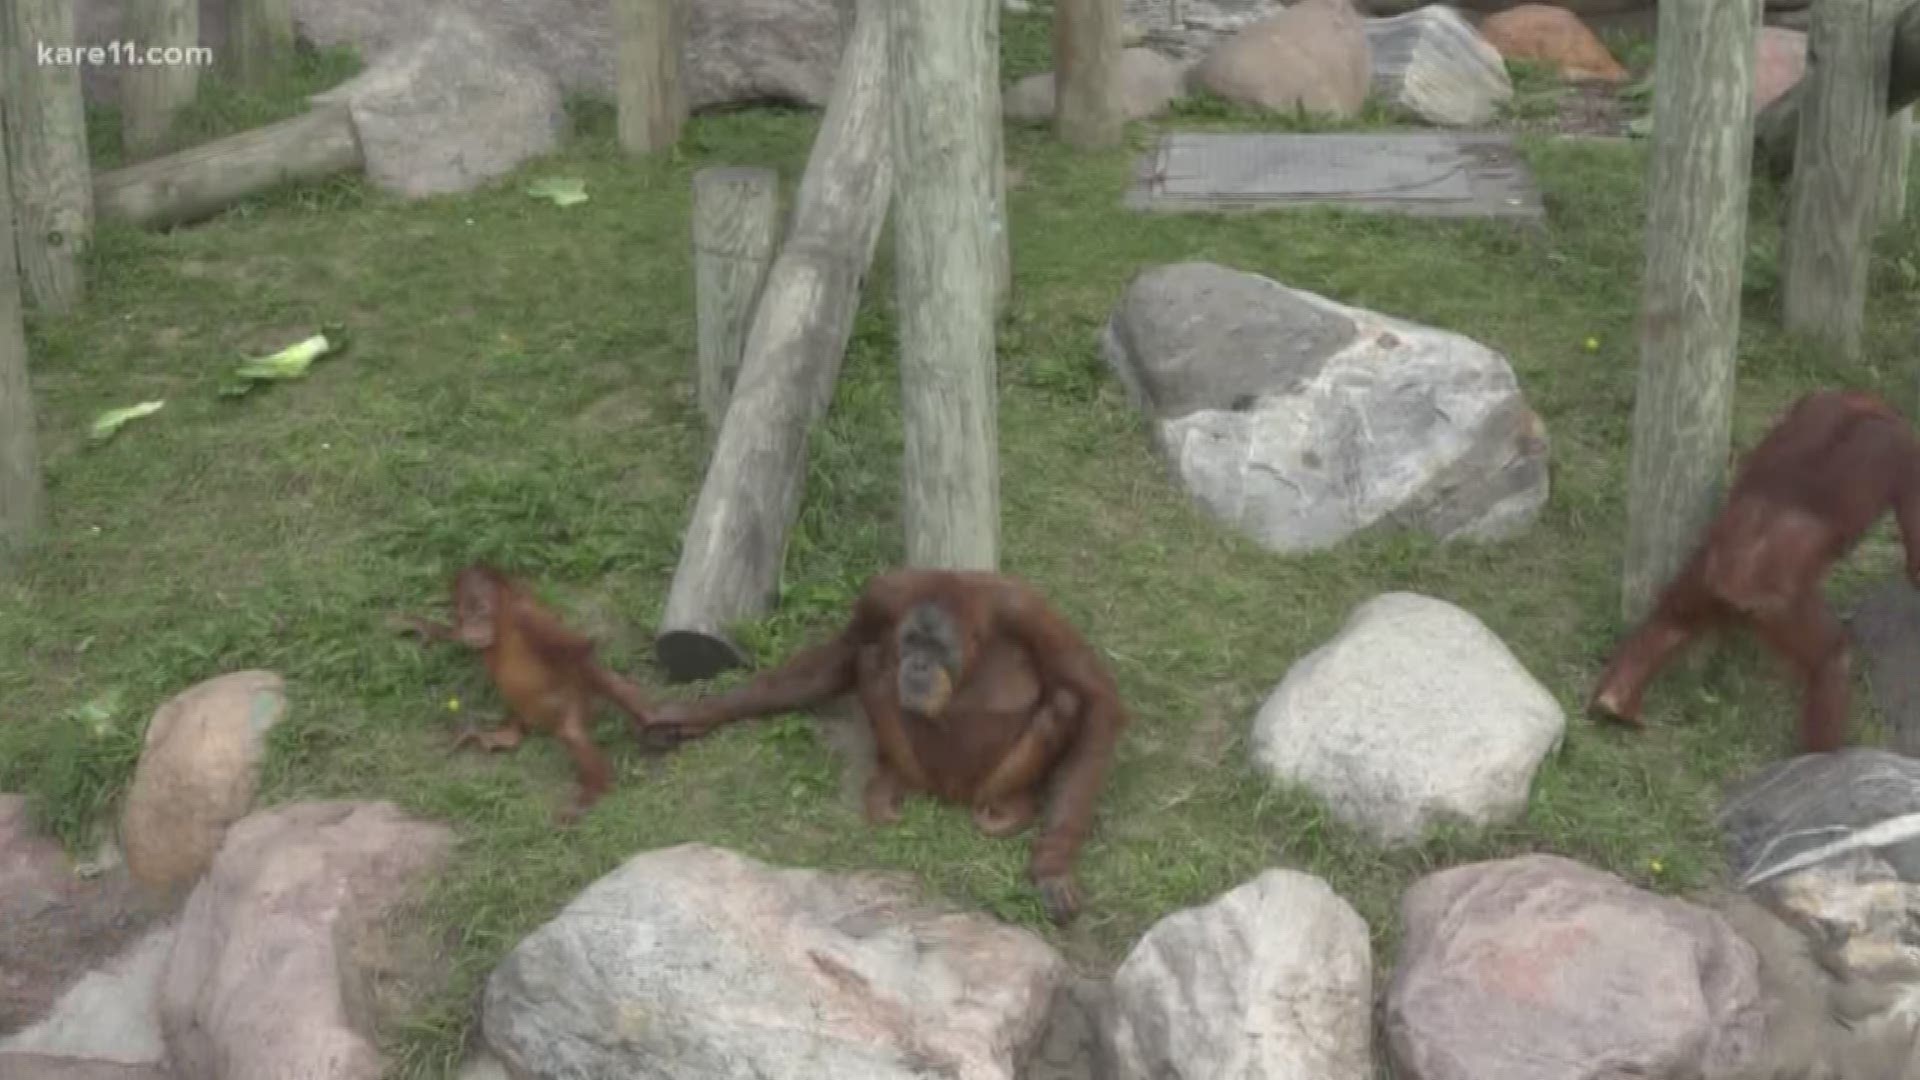 A Russian tourist was caught and arrested with a drugged baby orangutan in his luggage. https://kare11.tv/2TBBIfn